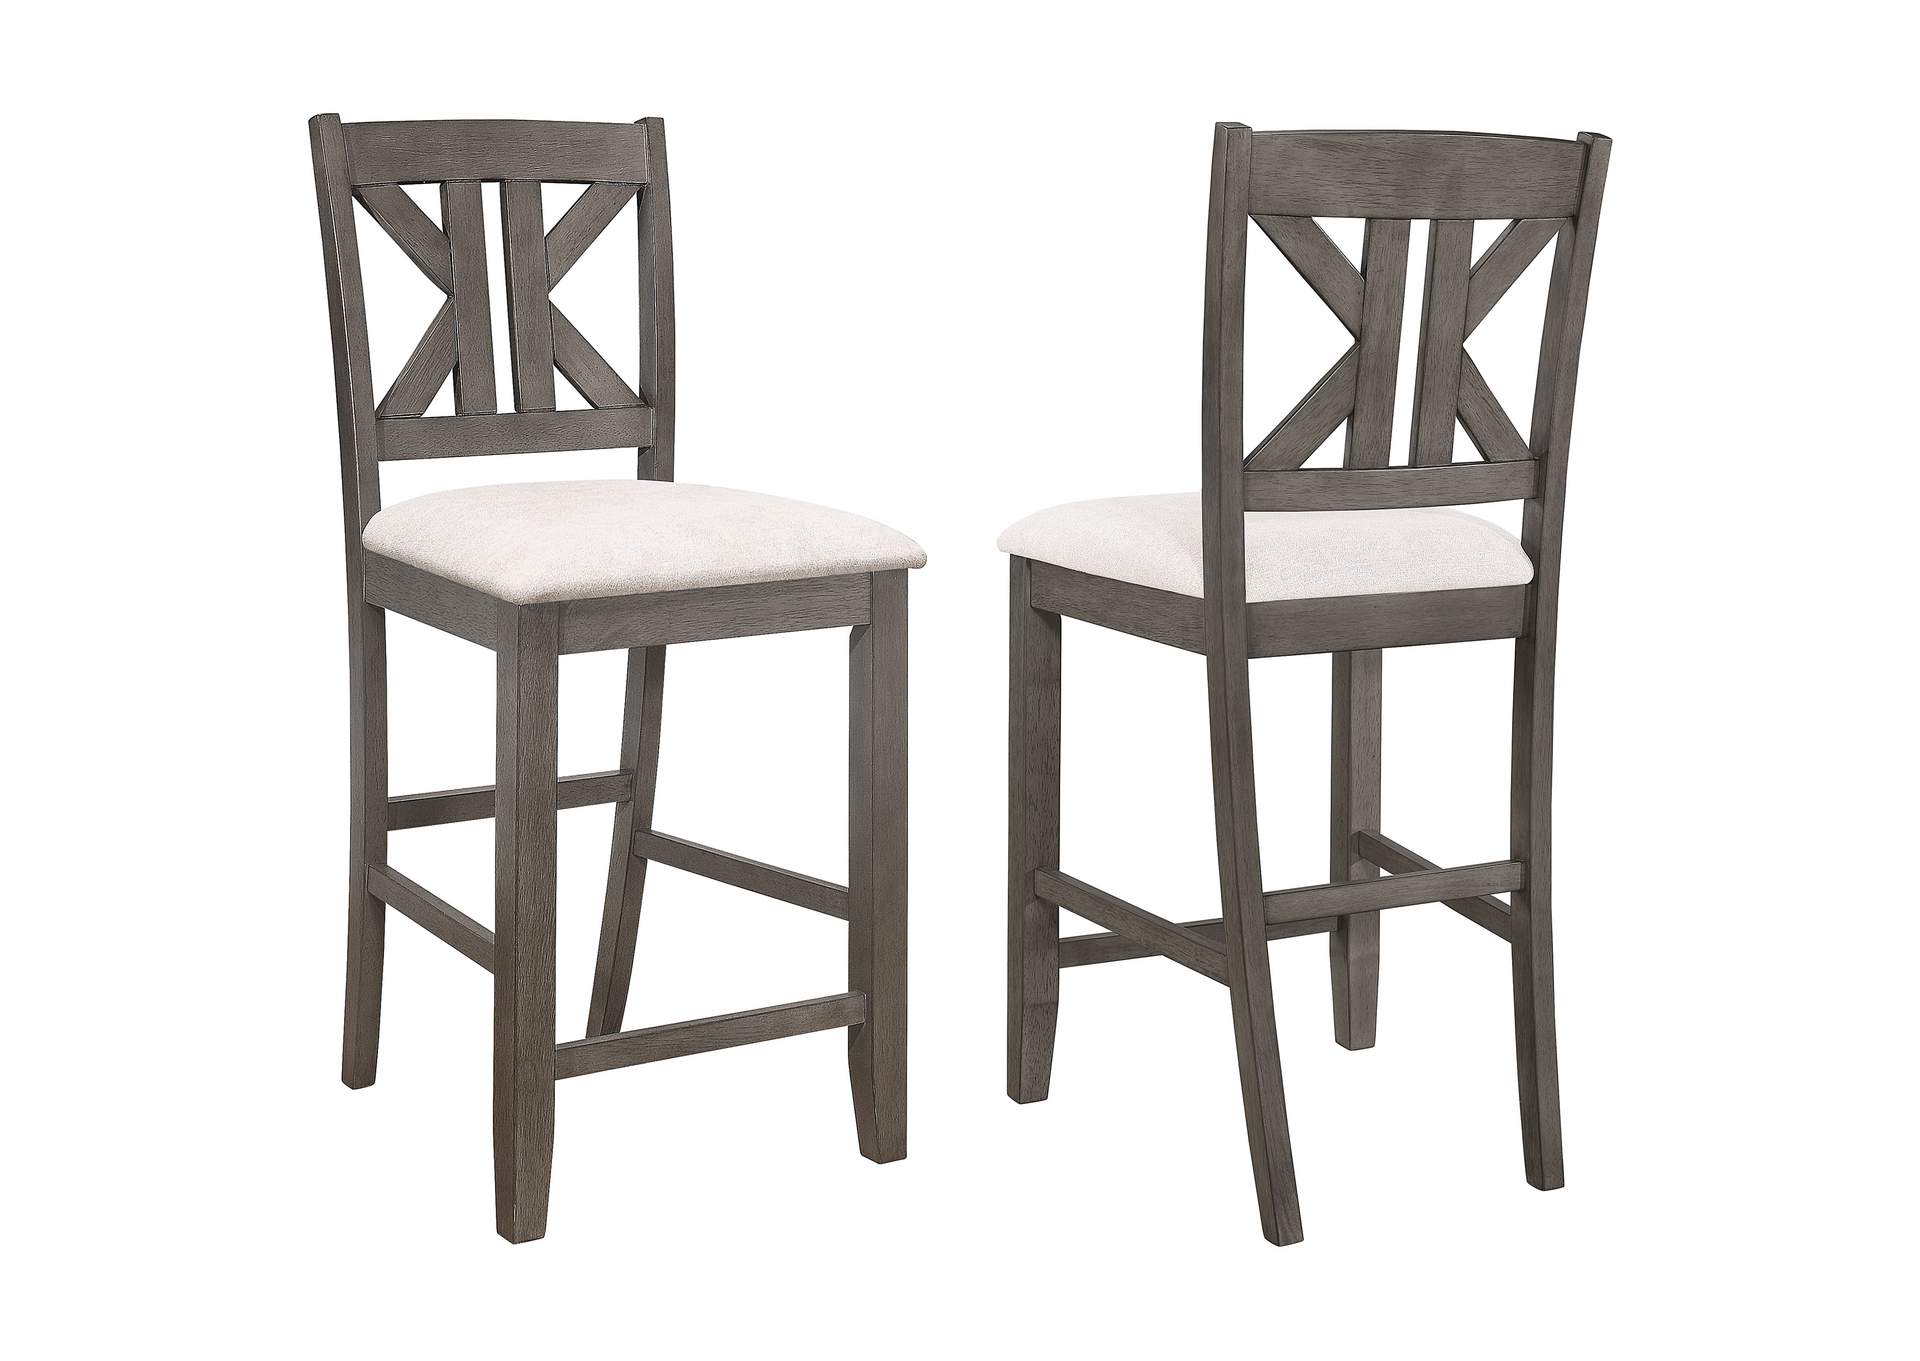 Athens Upholstered Seat Counter Height Stools Light Tan (Set of 2),Coaster Furniture